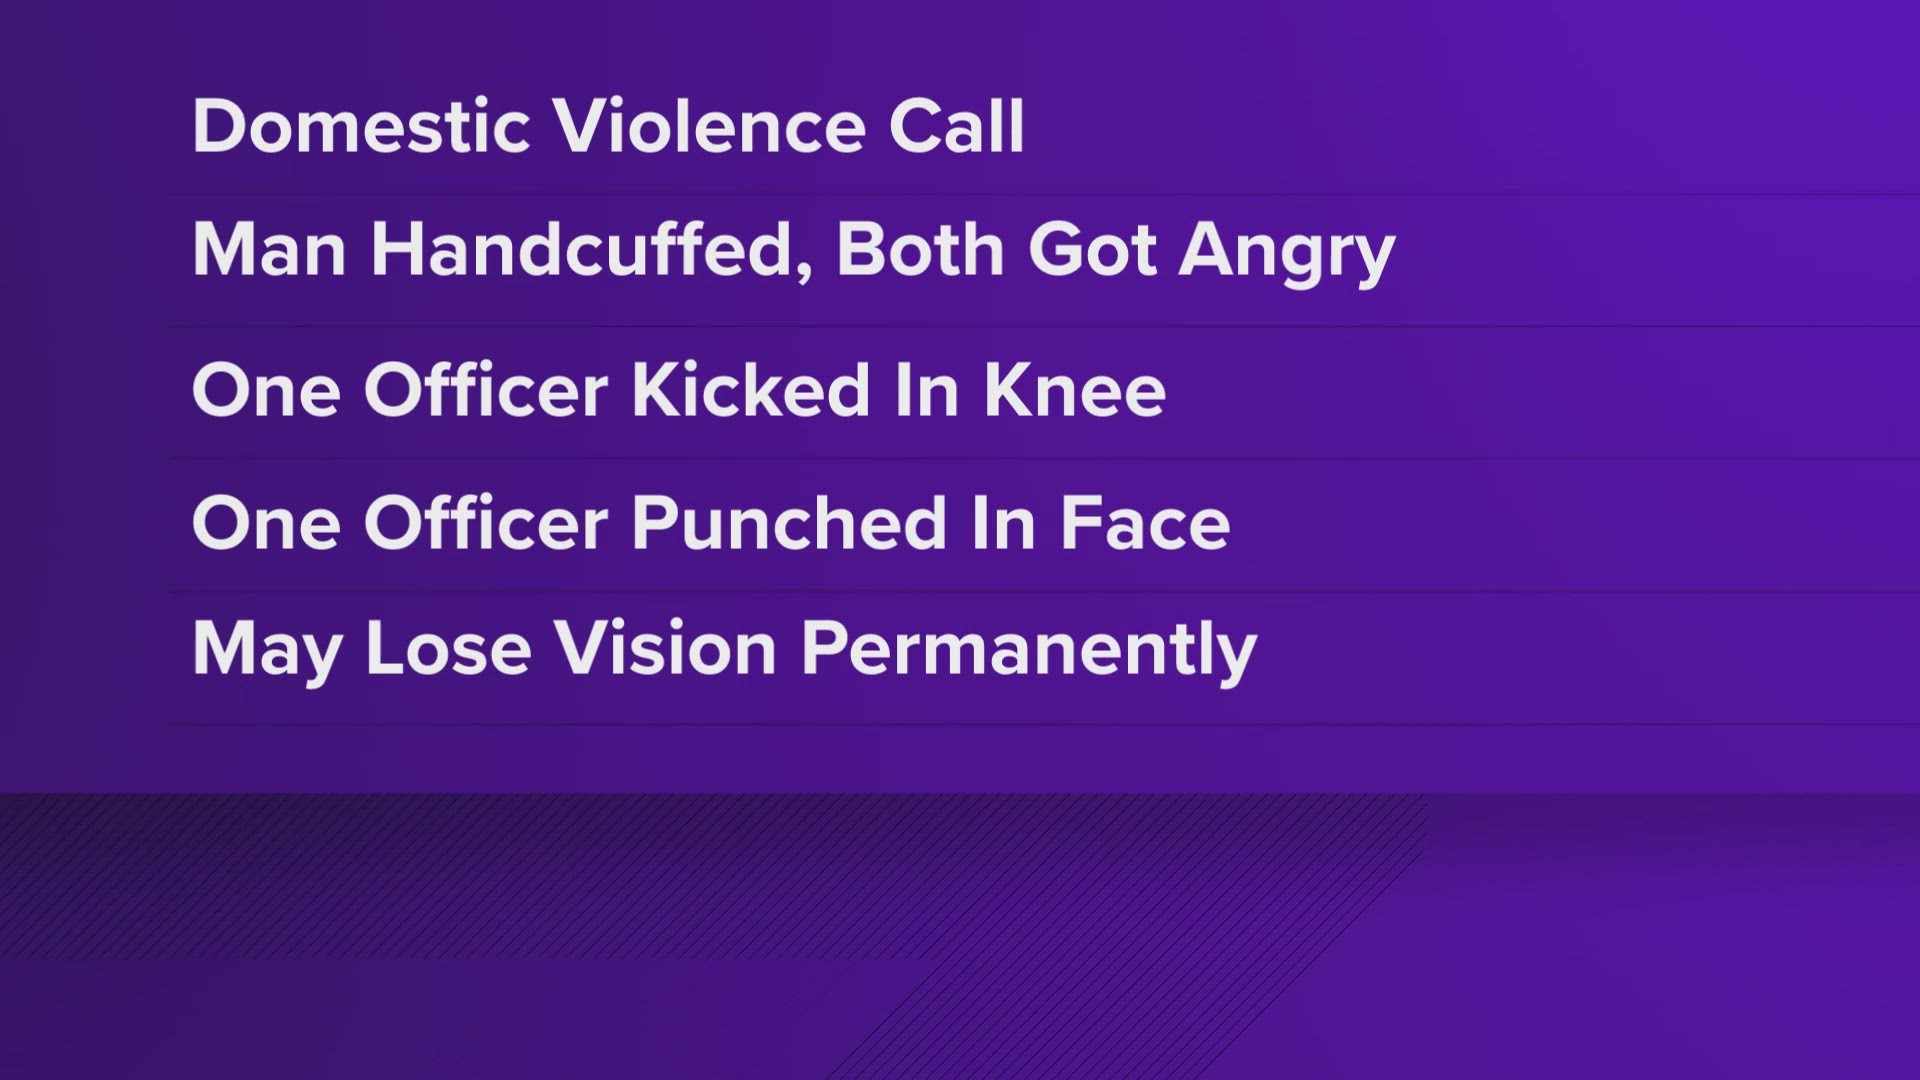 It happened during a domestic violence incident Saturday night in Evansville.